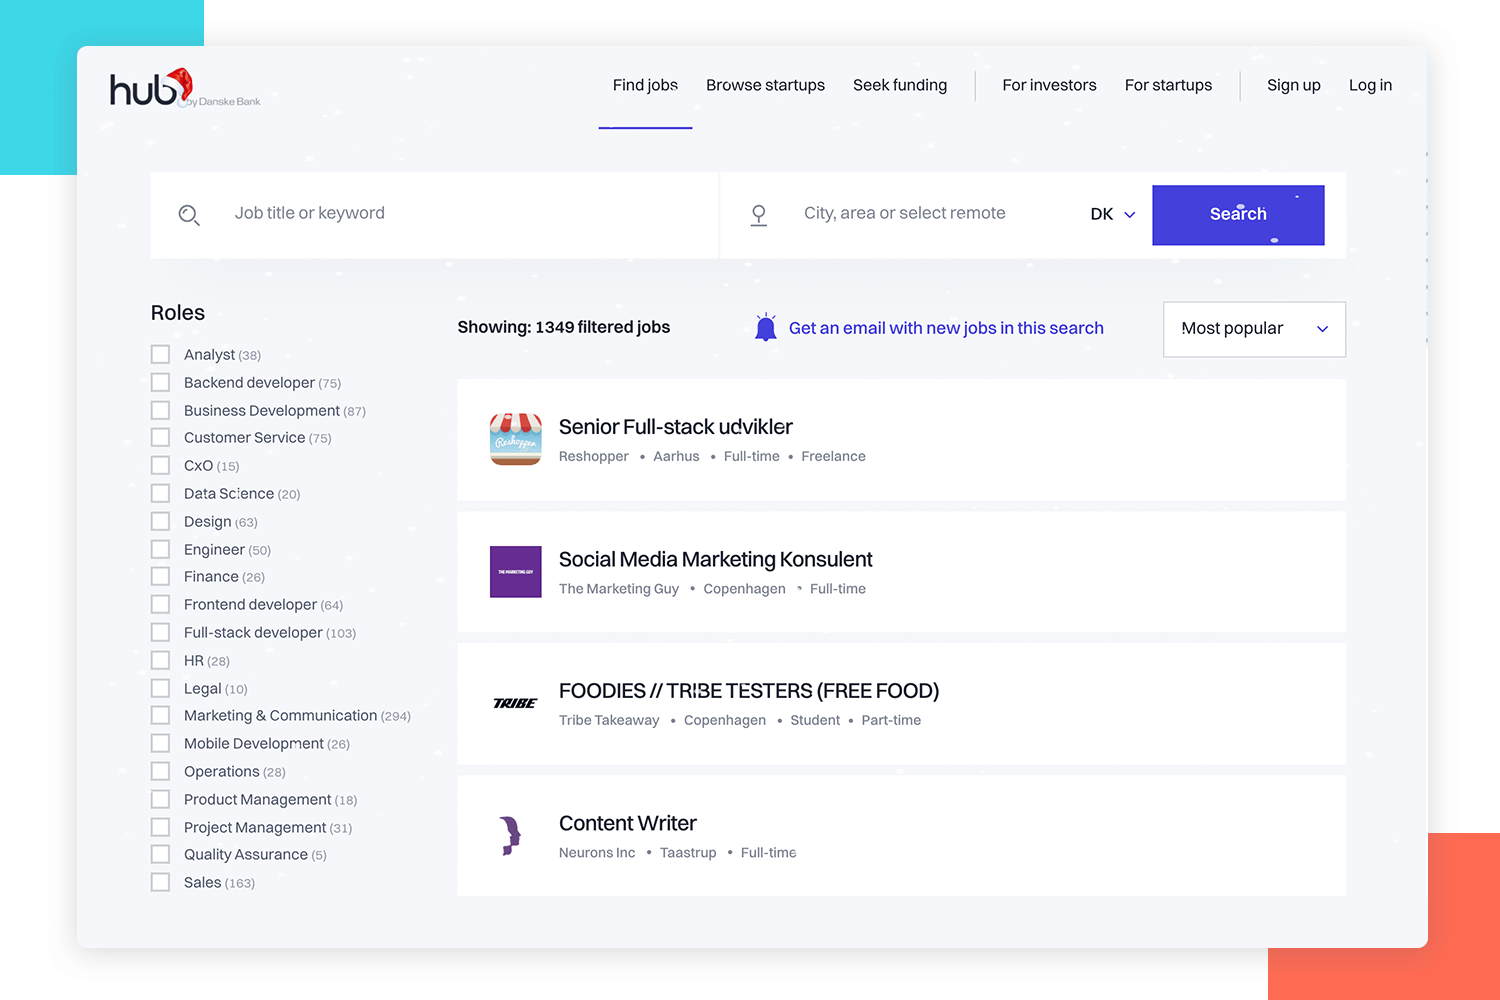 List UI design: principles - lists should be clear and simple